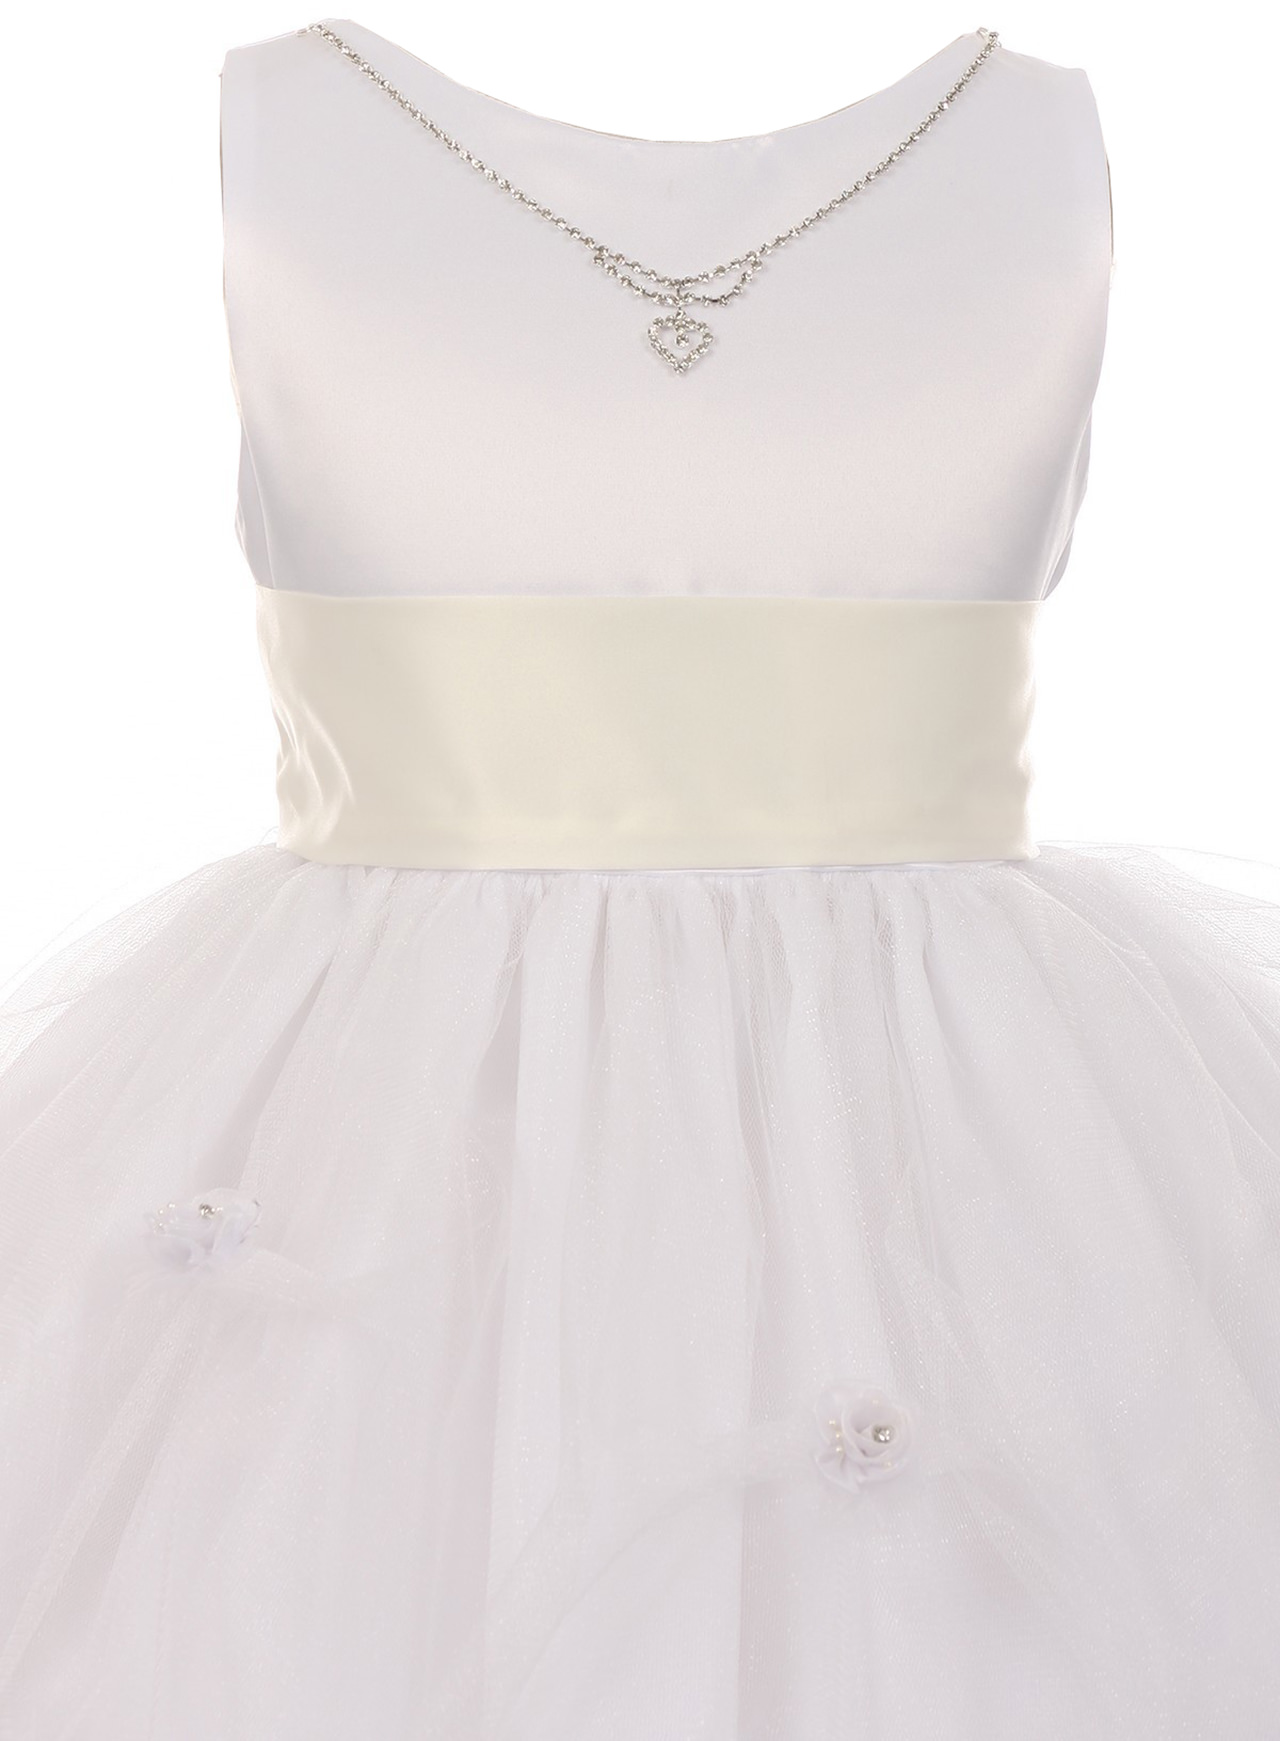 Little Girls Sleeveless Crystal Necklace Tulle Pageant Communion Flower Girl Dress Red 6 (C01B16W) - image 3 of 3